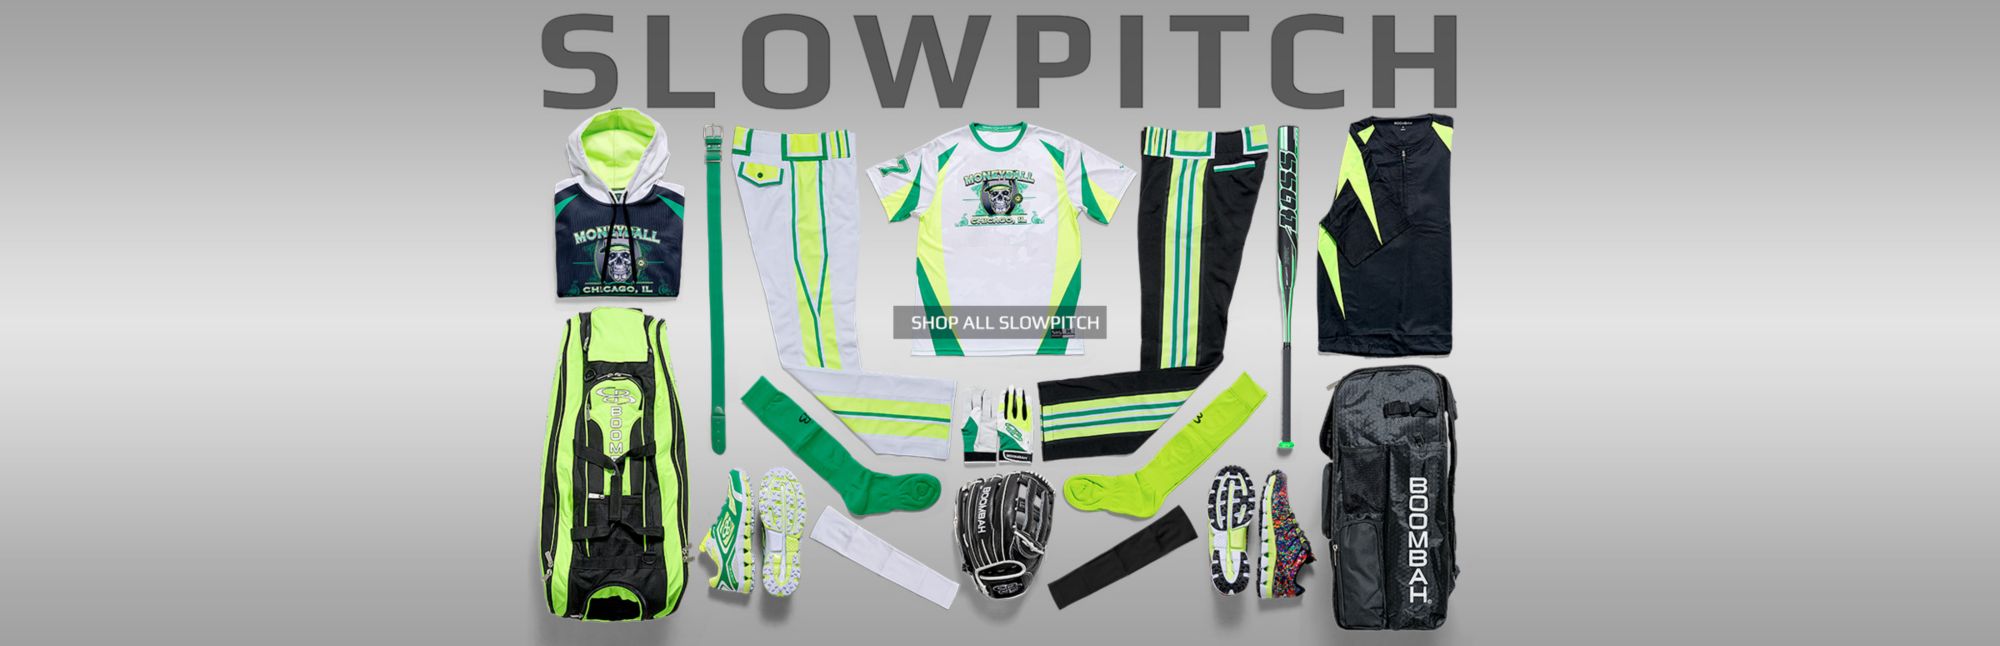 Shop all Slowpitch Items